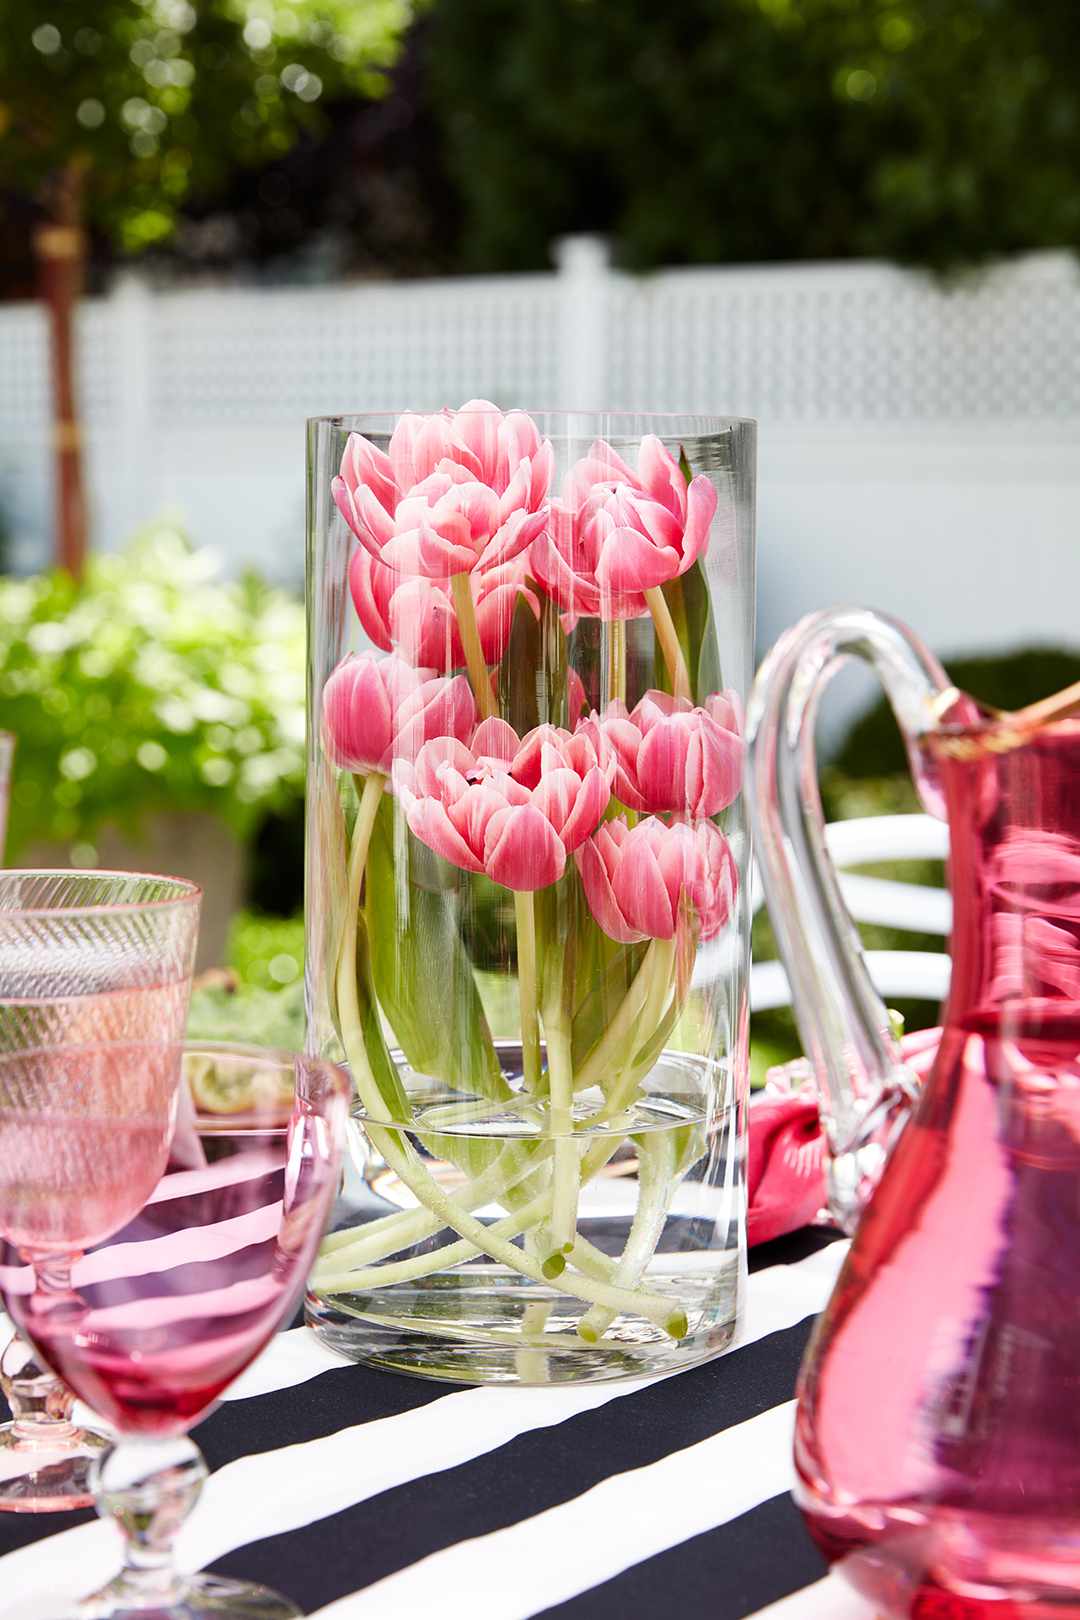 tulips in glass vase on striped table